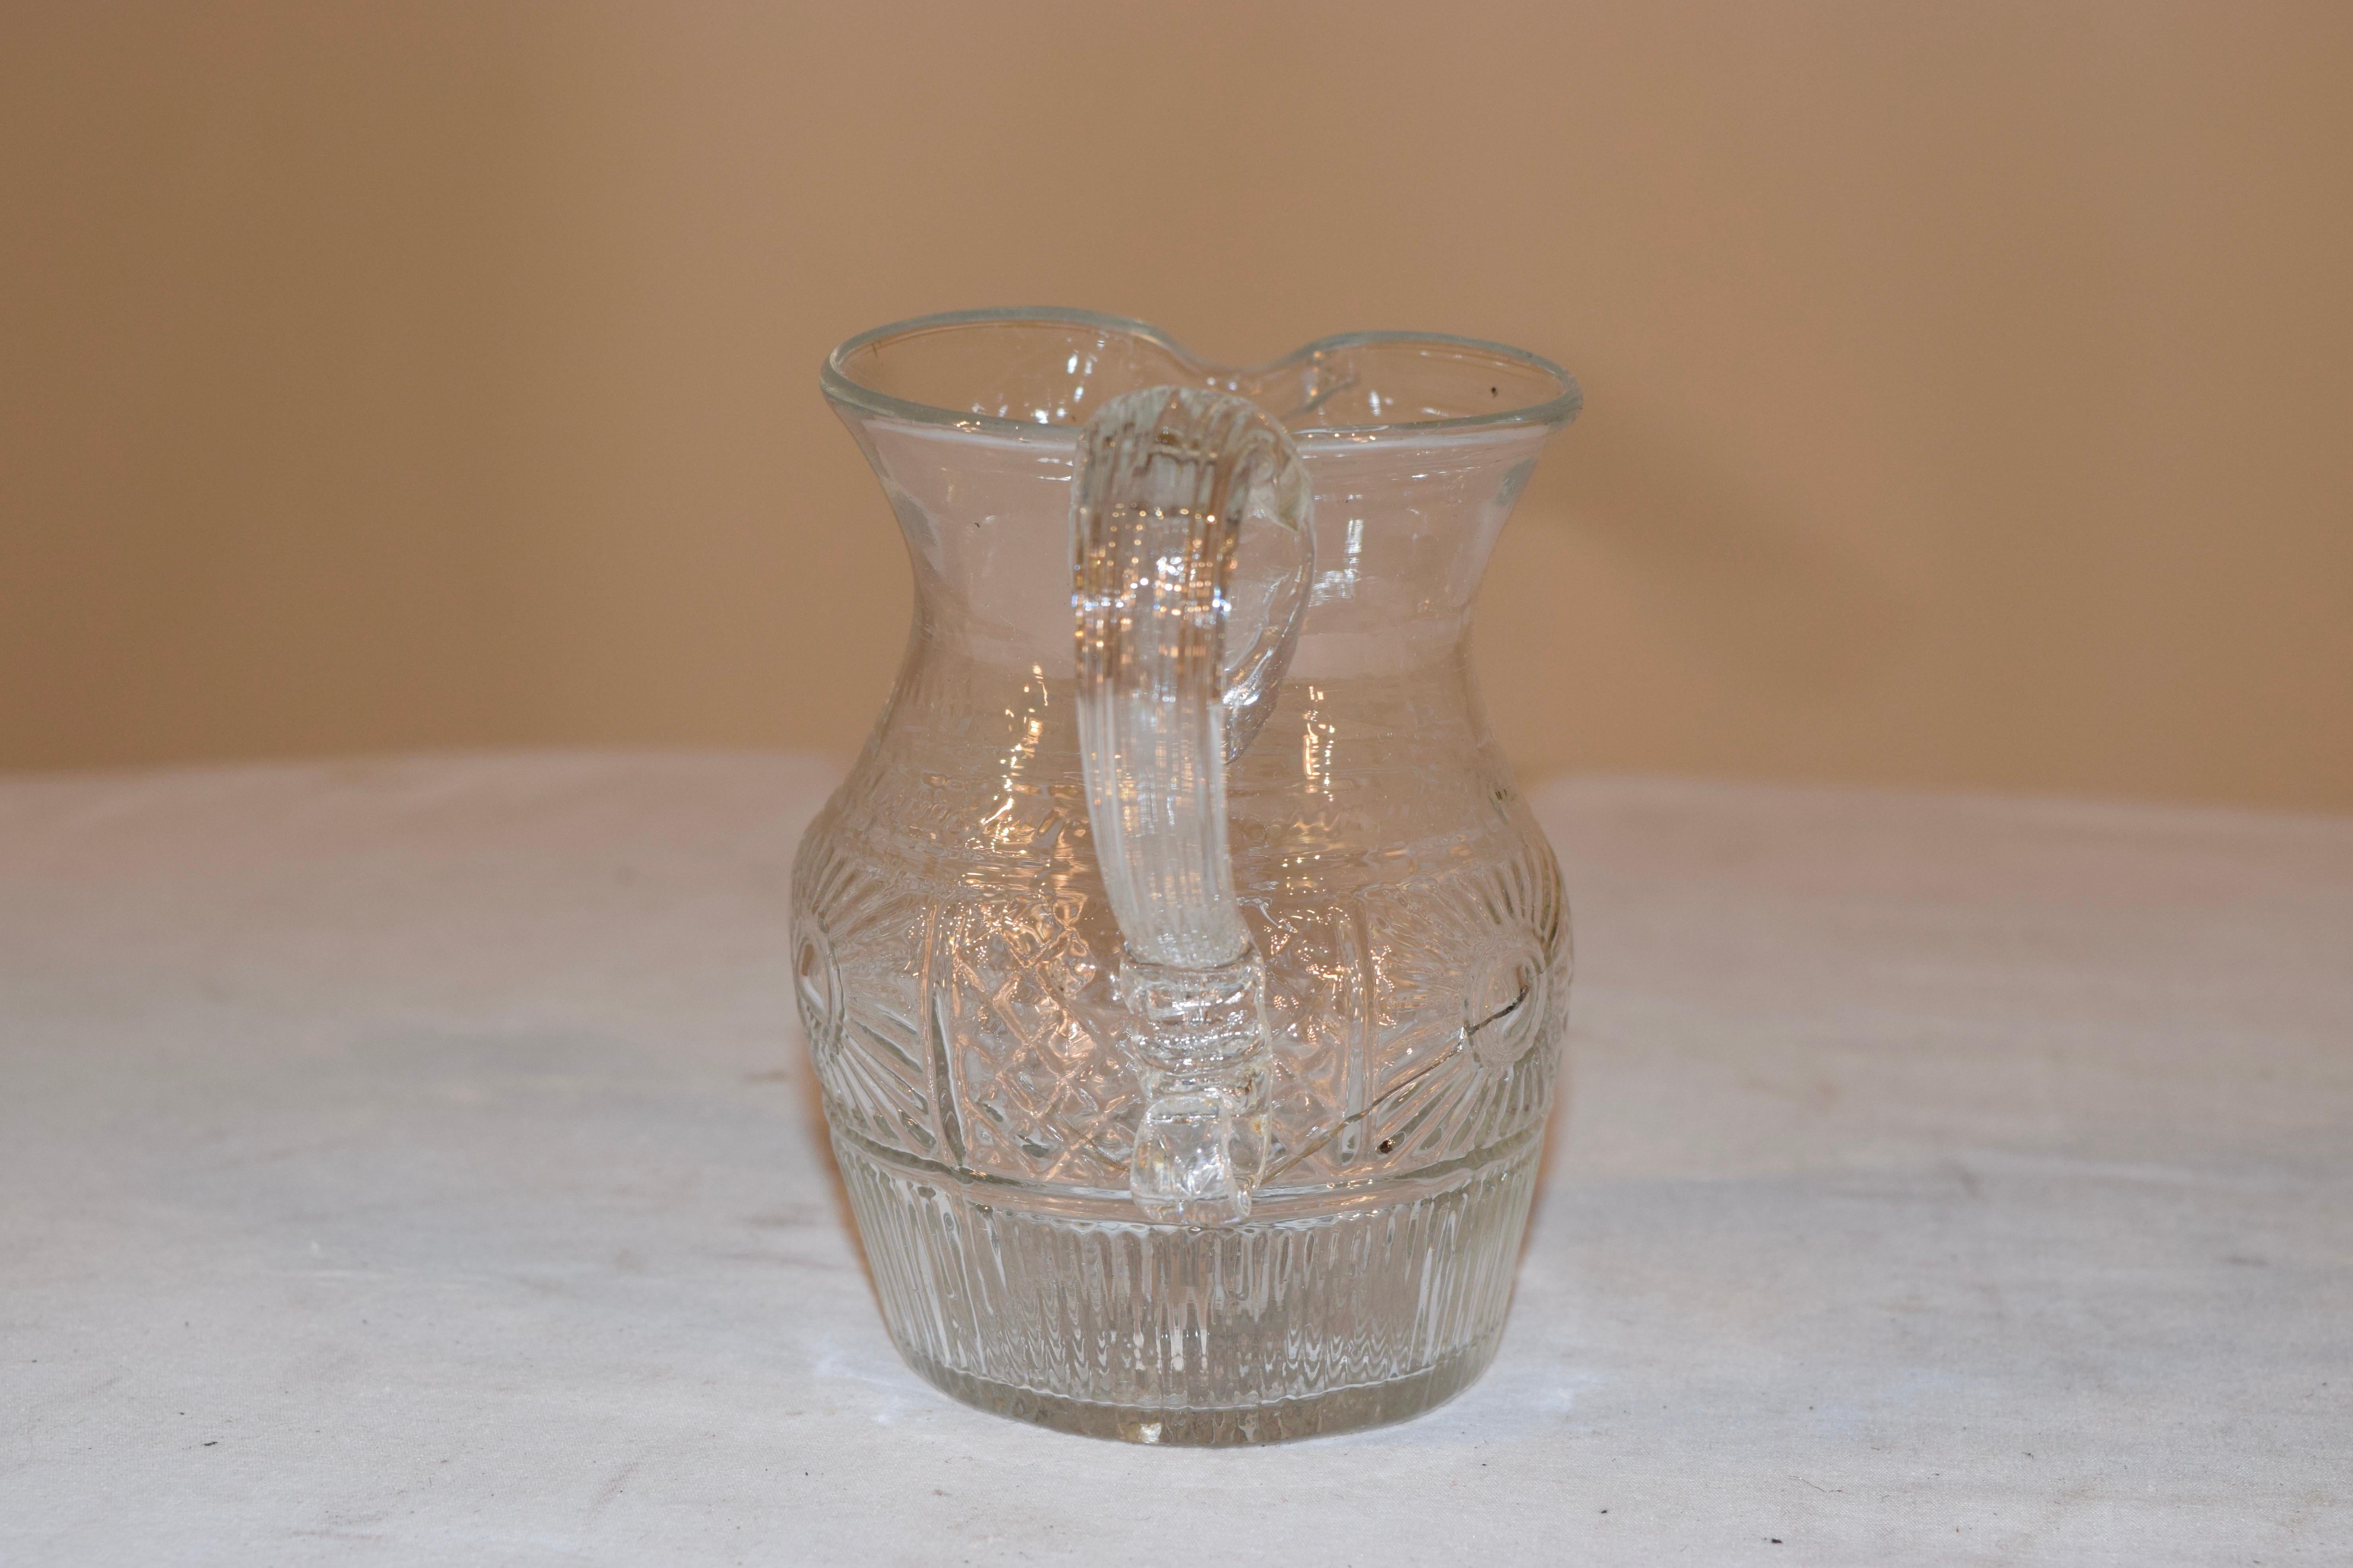 Early 19th century American blown glass pitcher with applied handle.